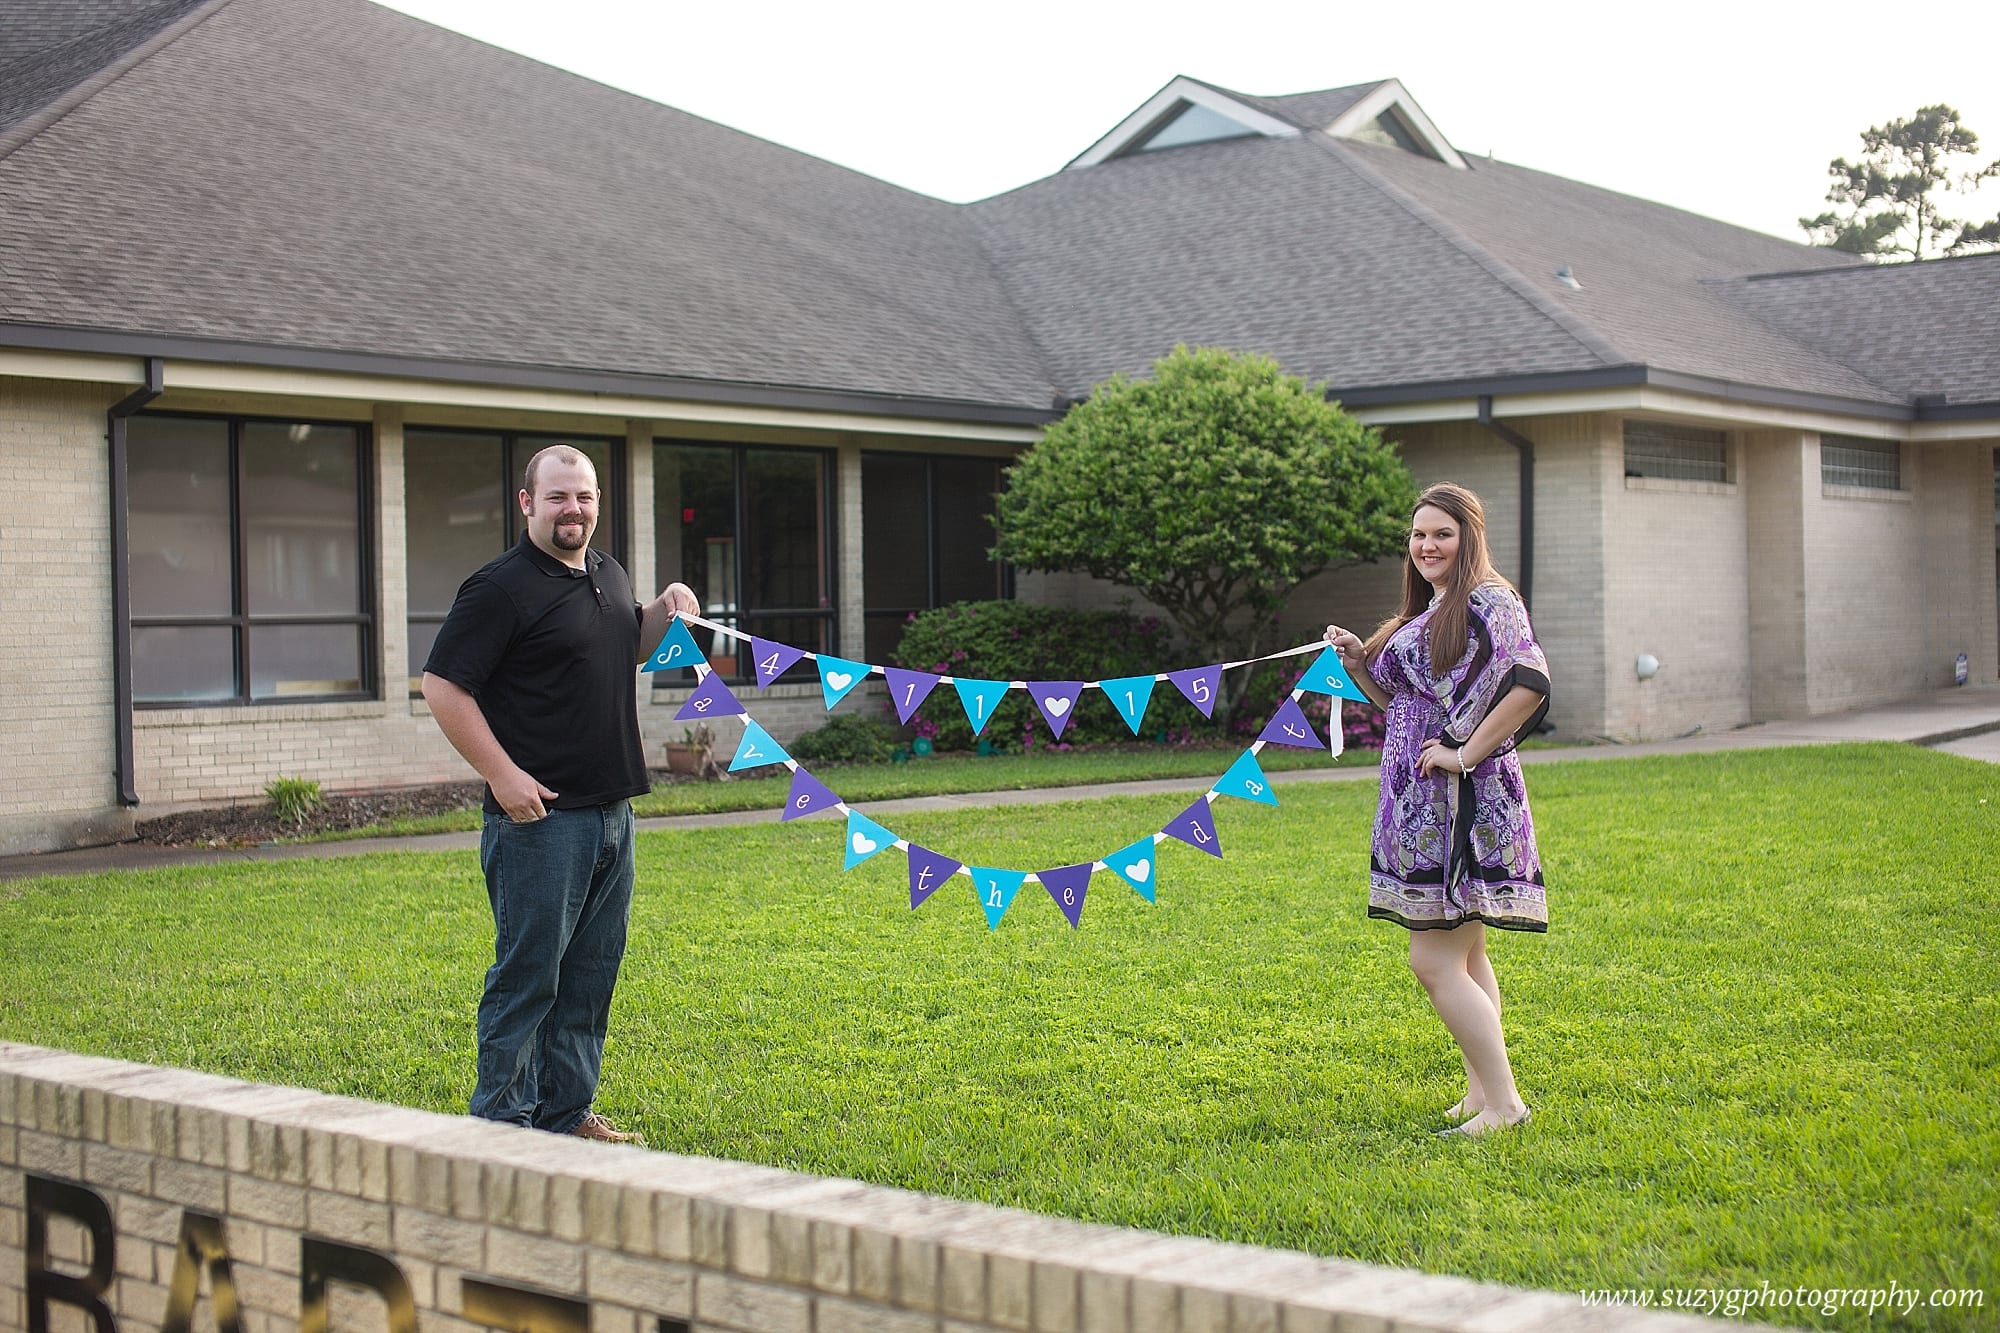 engagements-new orleans-texas-baton rouge-lake charles-suzy g-photography-suzygphotography_0032